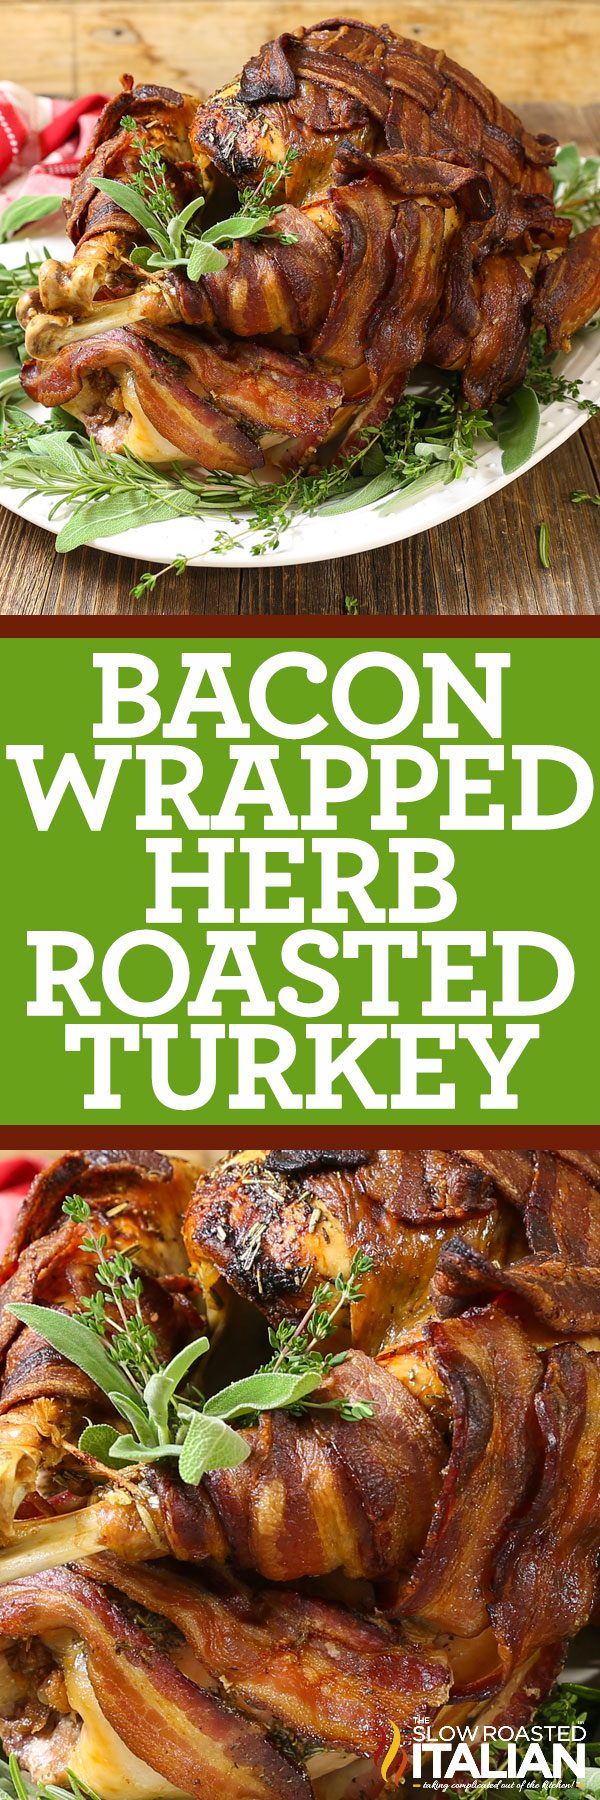 bacon-wrapped-herb-roasted-turkey-pin-6356885